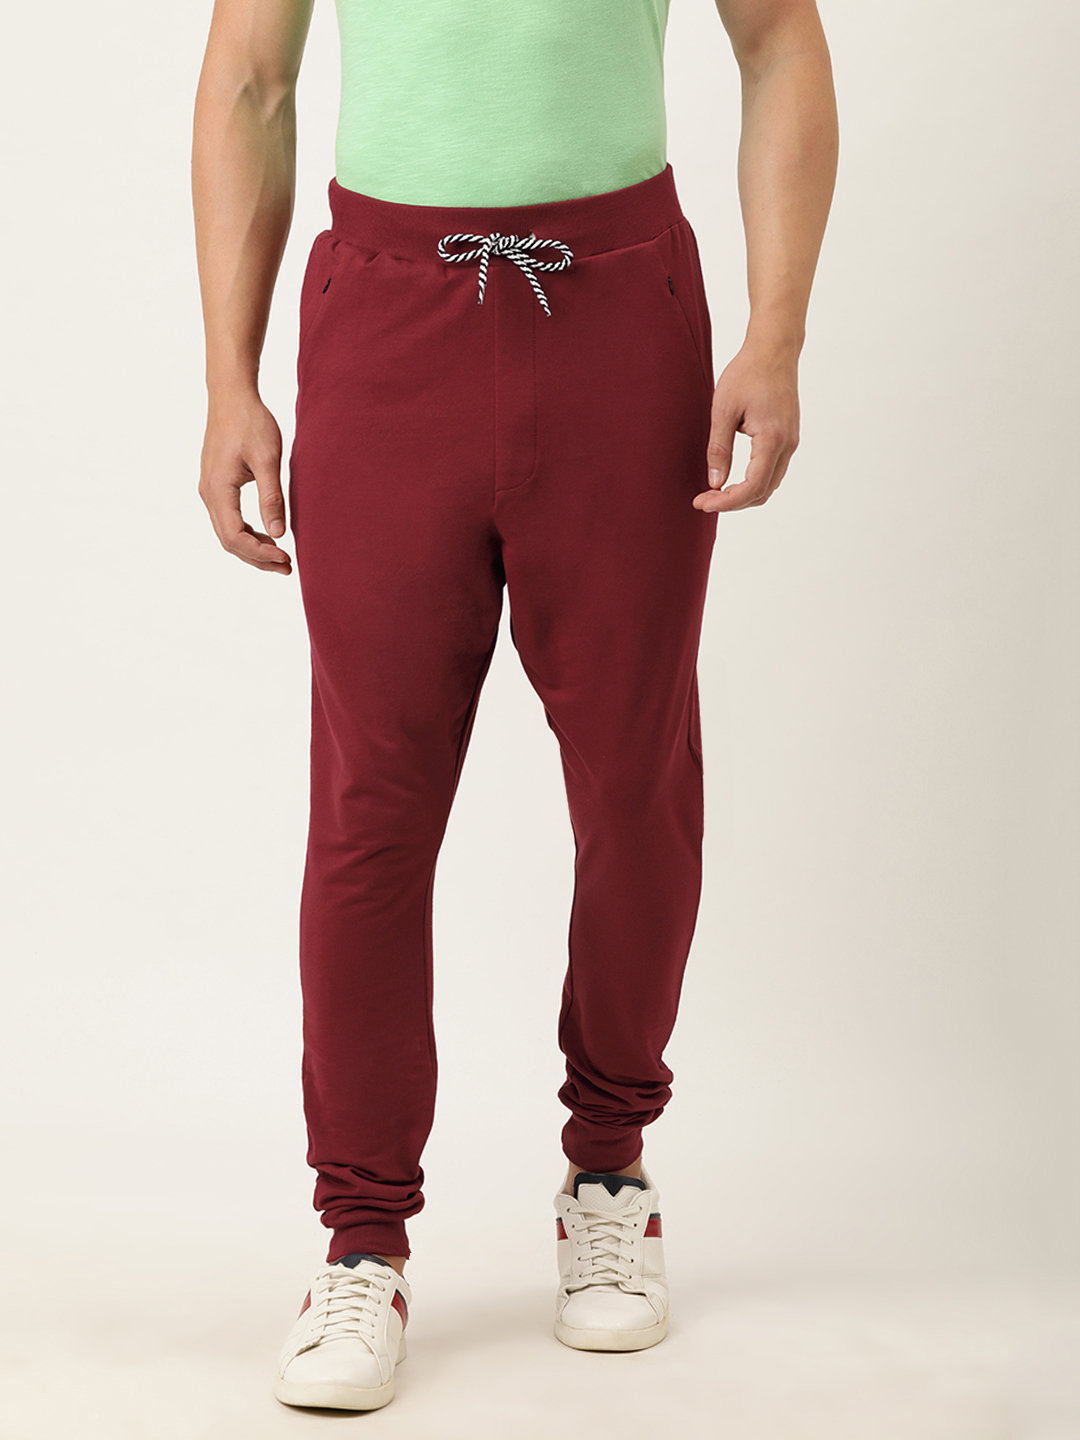 Buy Difference of Opinion Men's Maroon Solid Joggers for Men Maroon ...